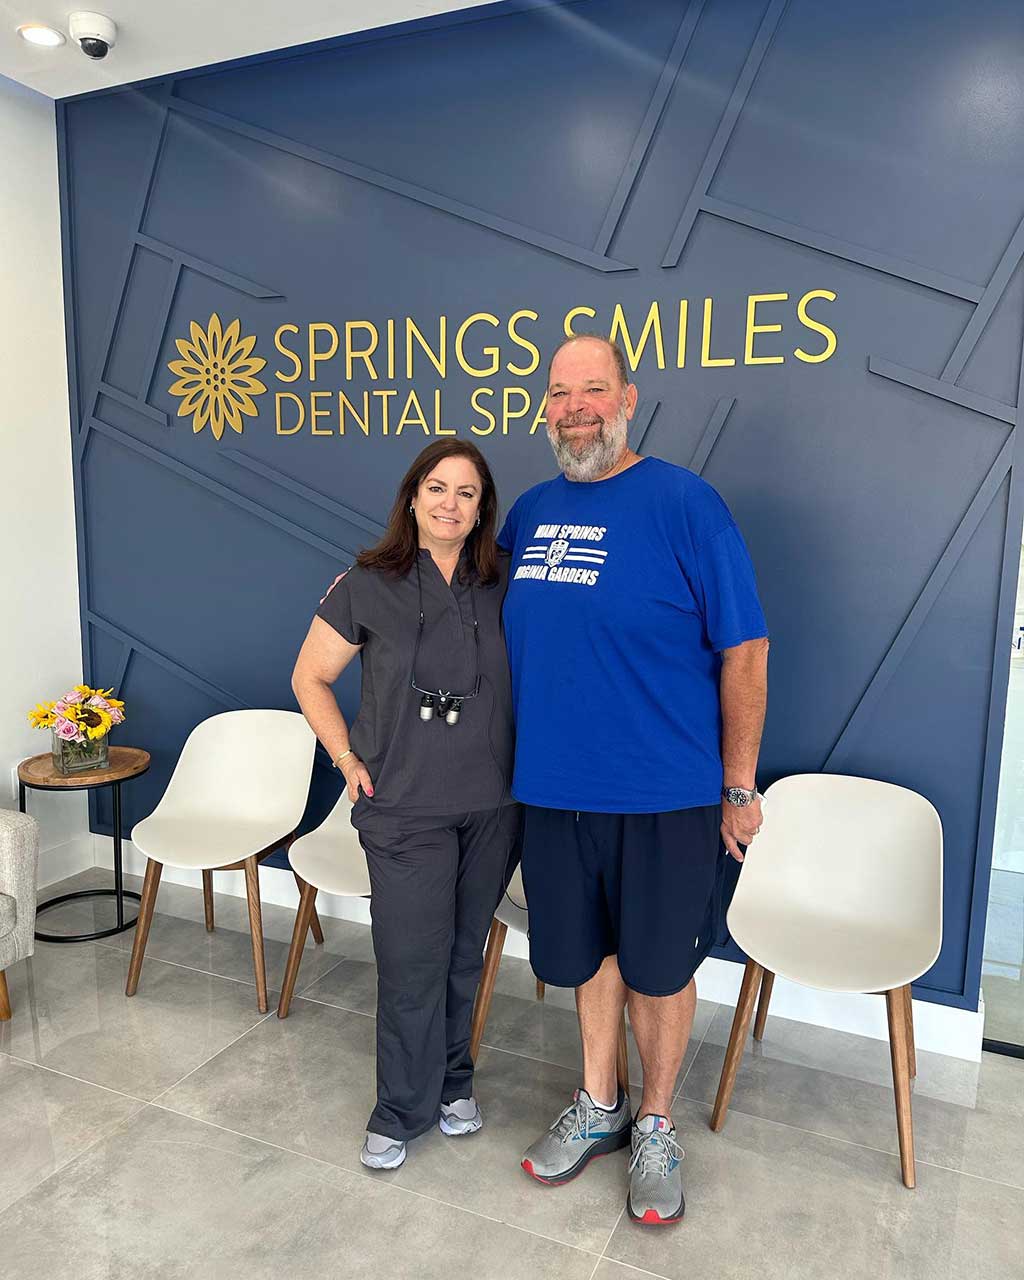 Springs Smiles Dental Spa with Vivianne de la Cámara and her 1st patient at the new facility (photo credit @springssmilesdentalspa)